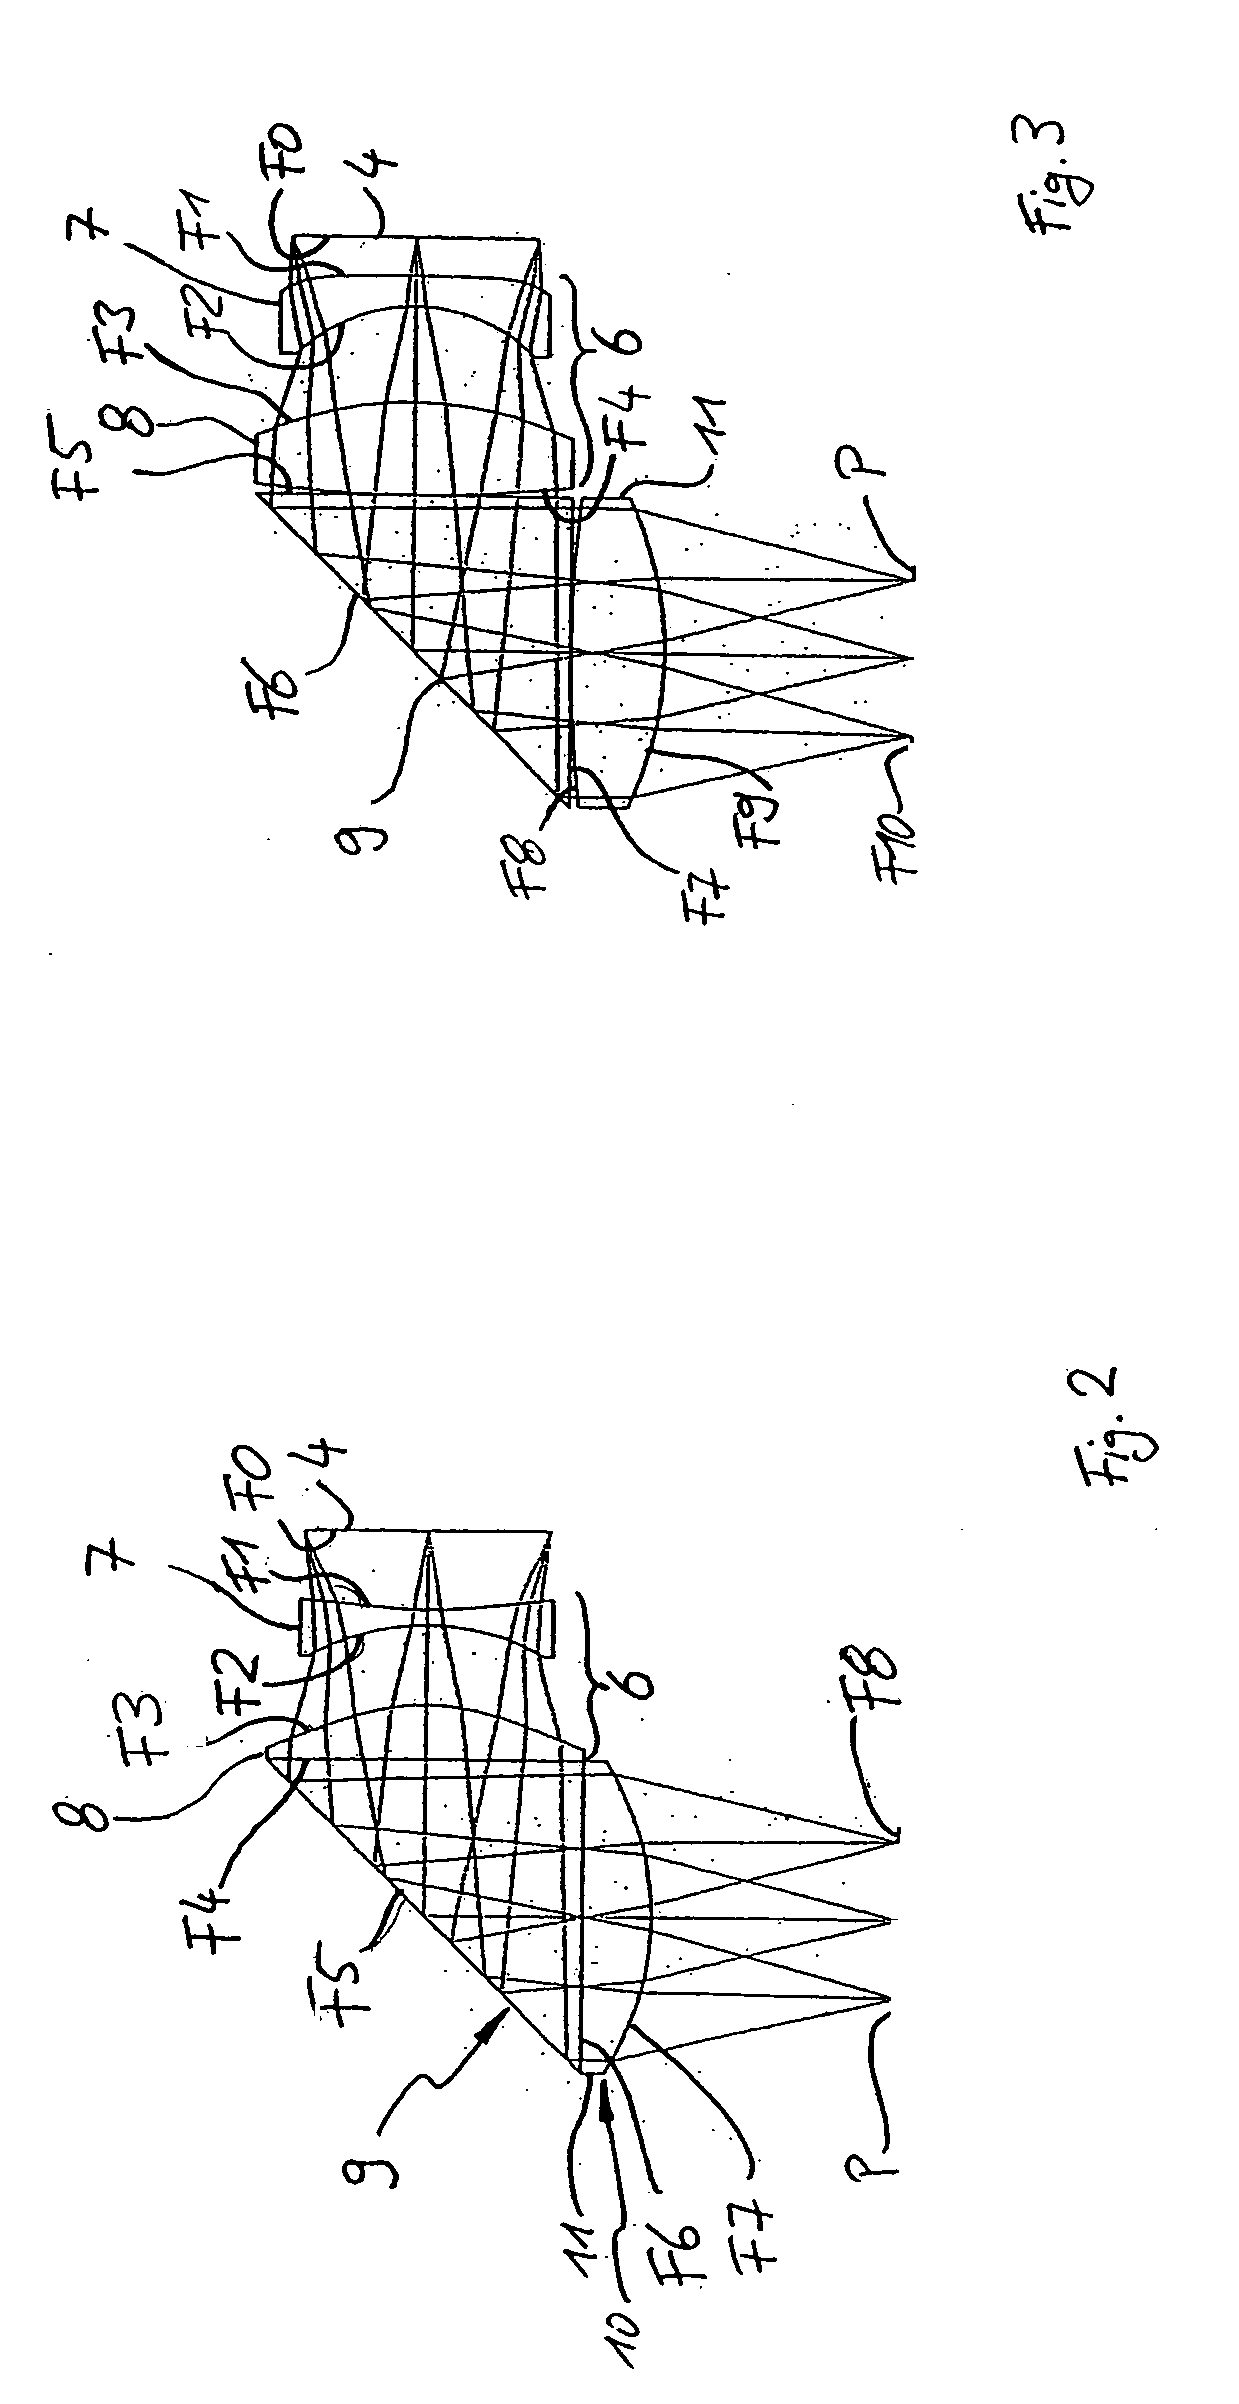 HMD device with imaging optics comprising an aspheric surface